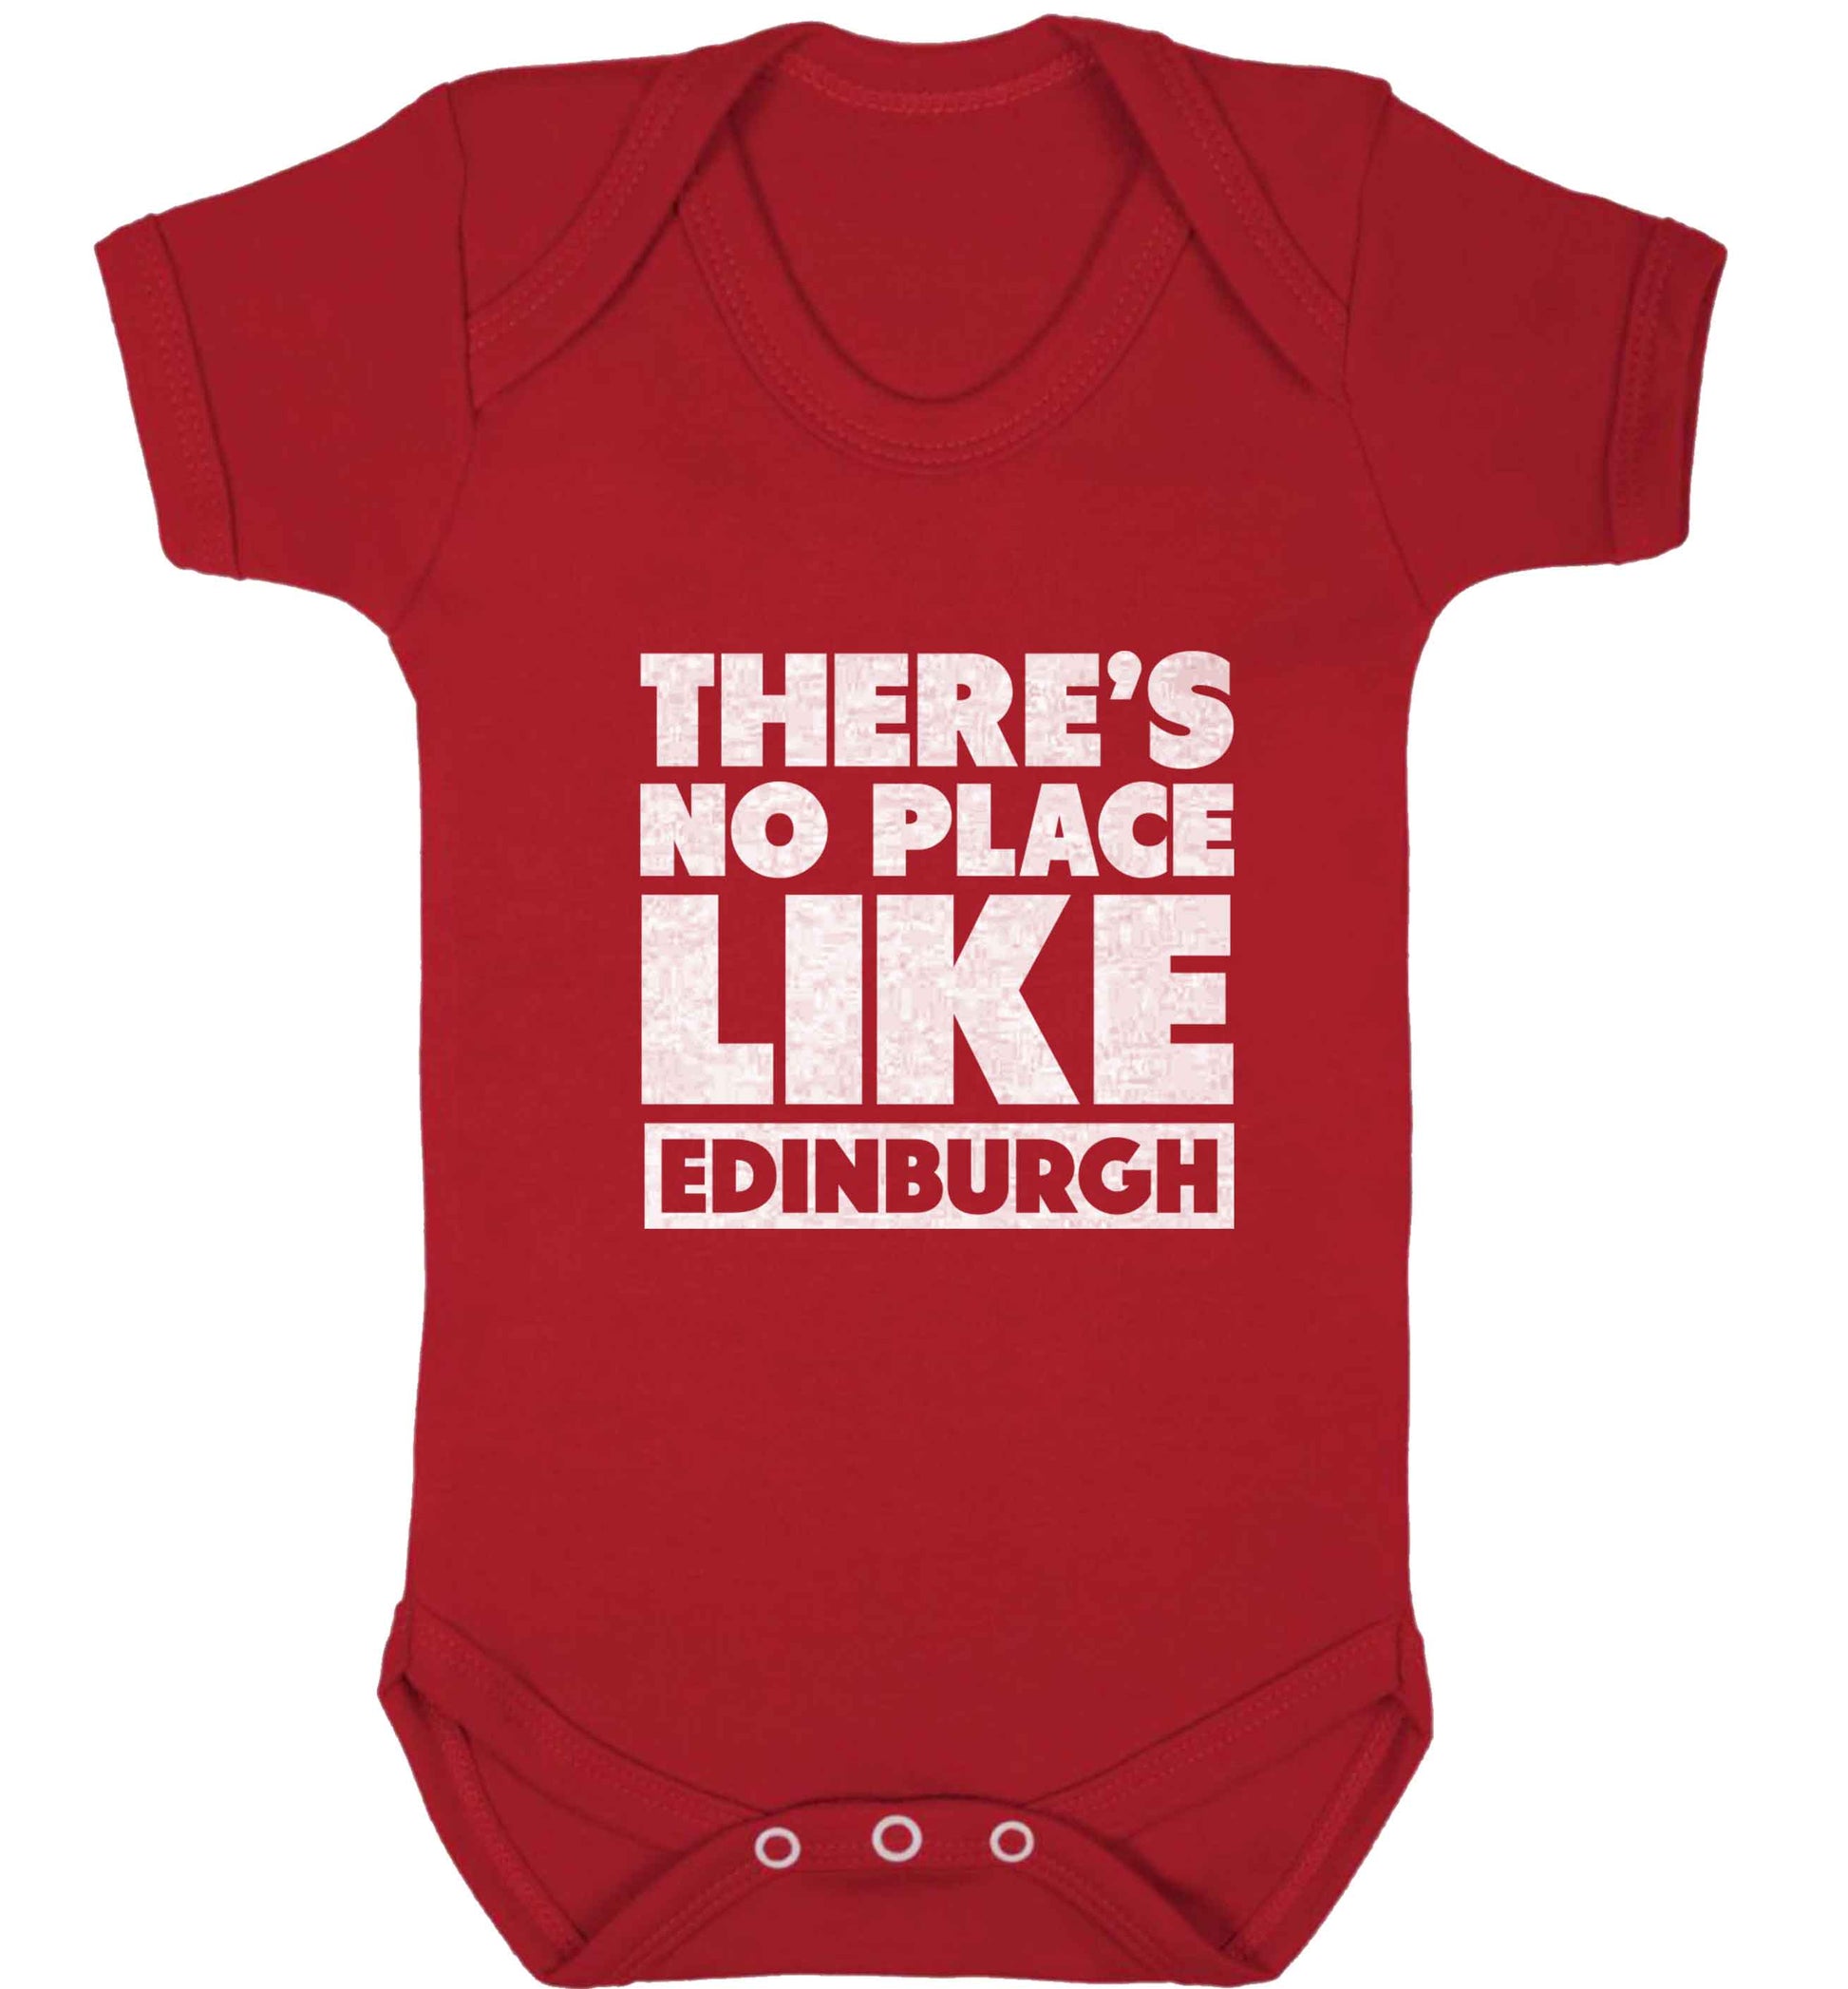 There's no place like Edinburgh baby vest red 18-24 months